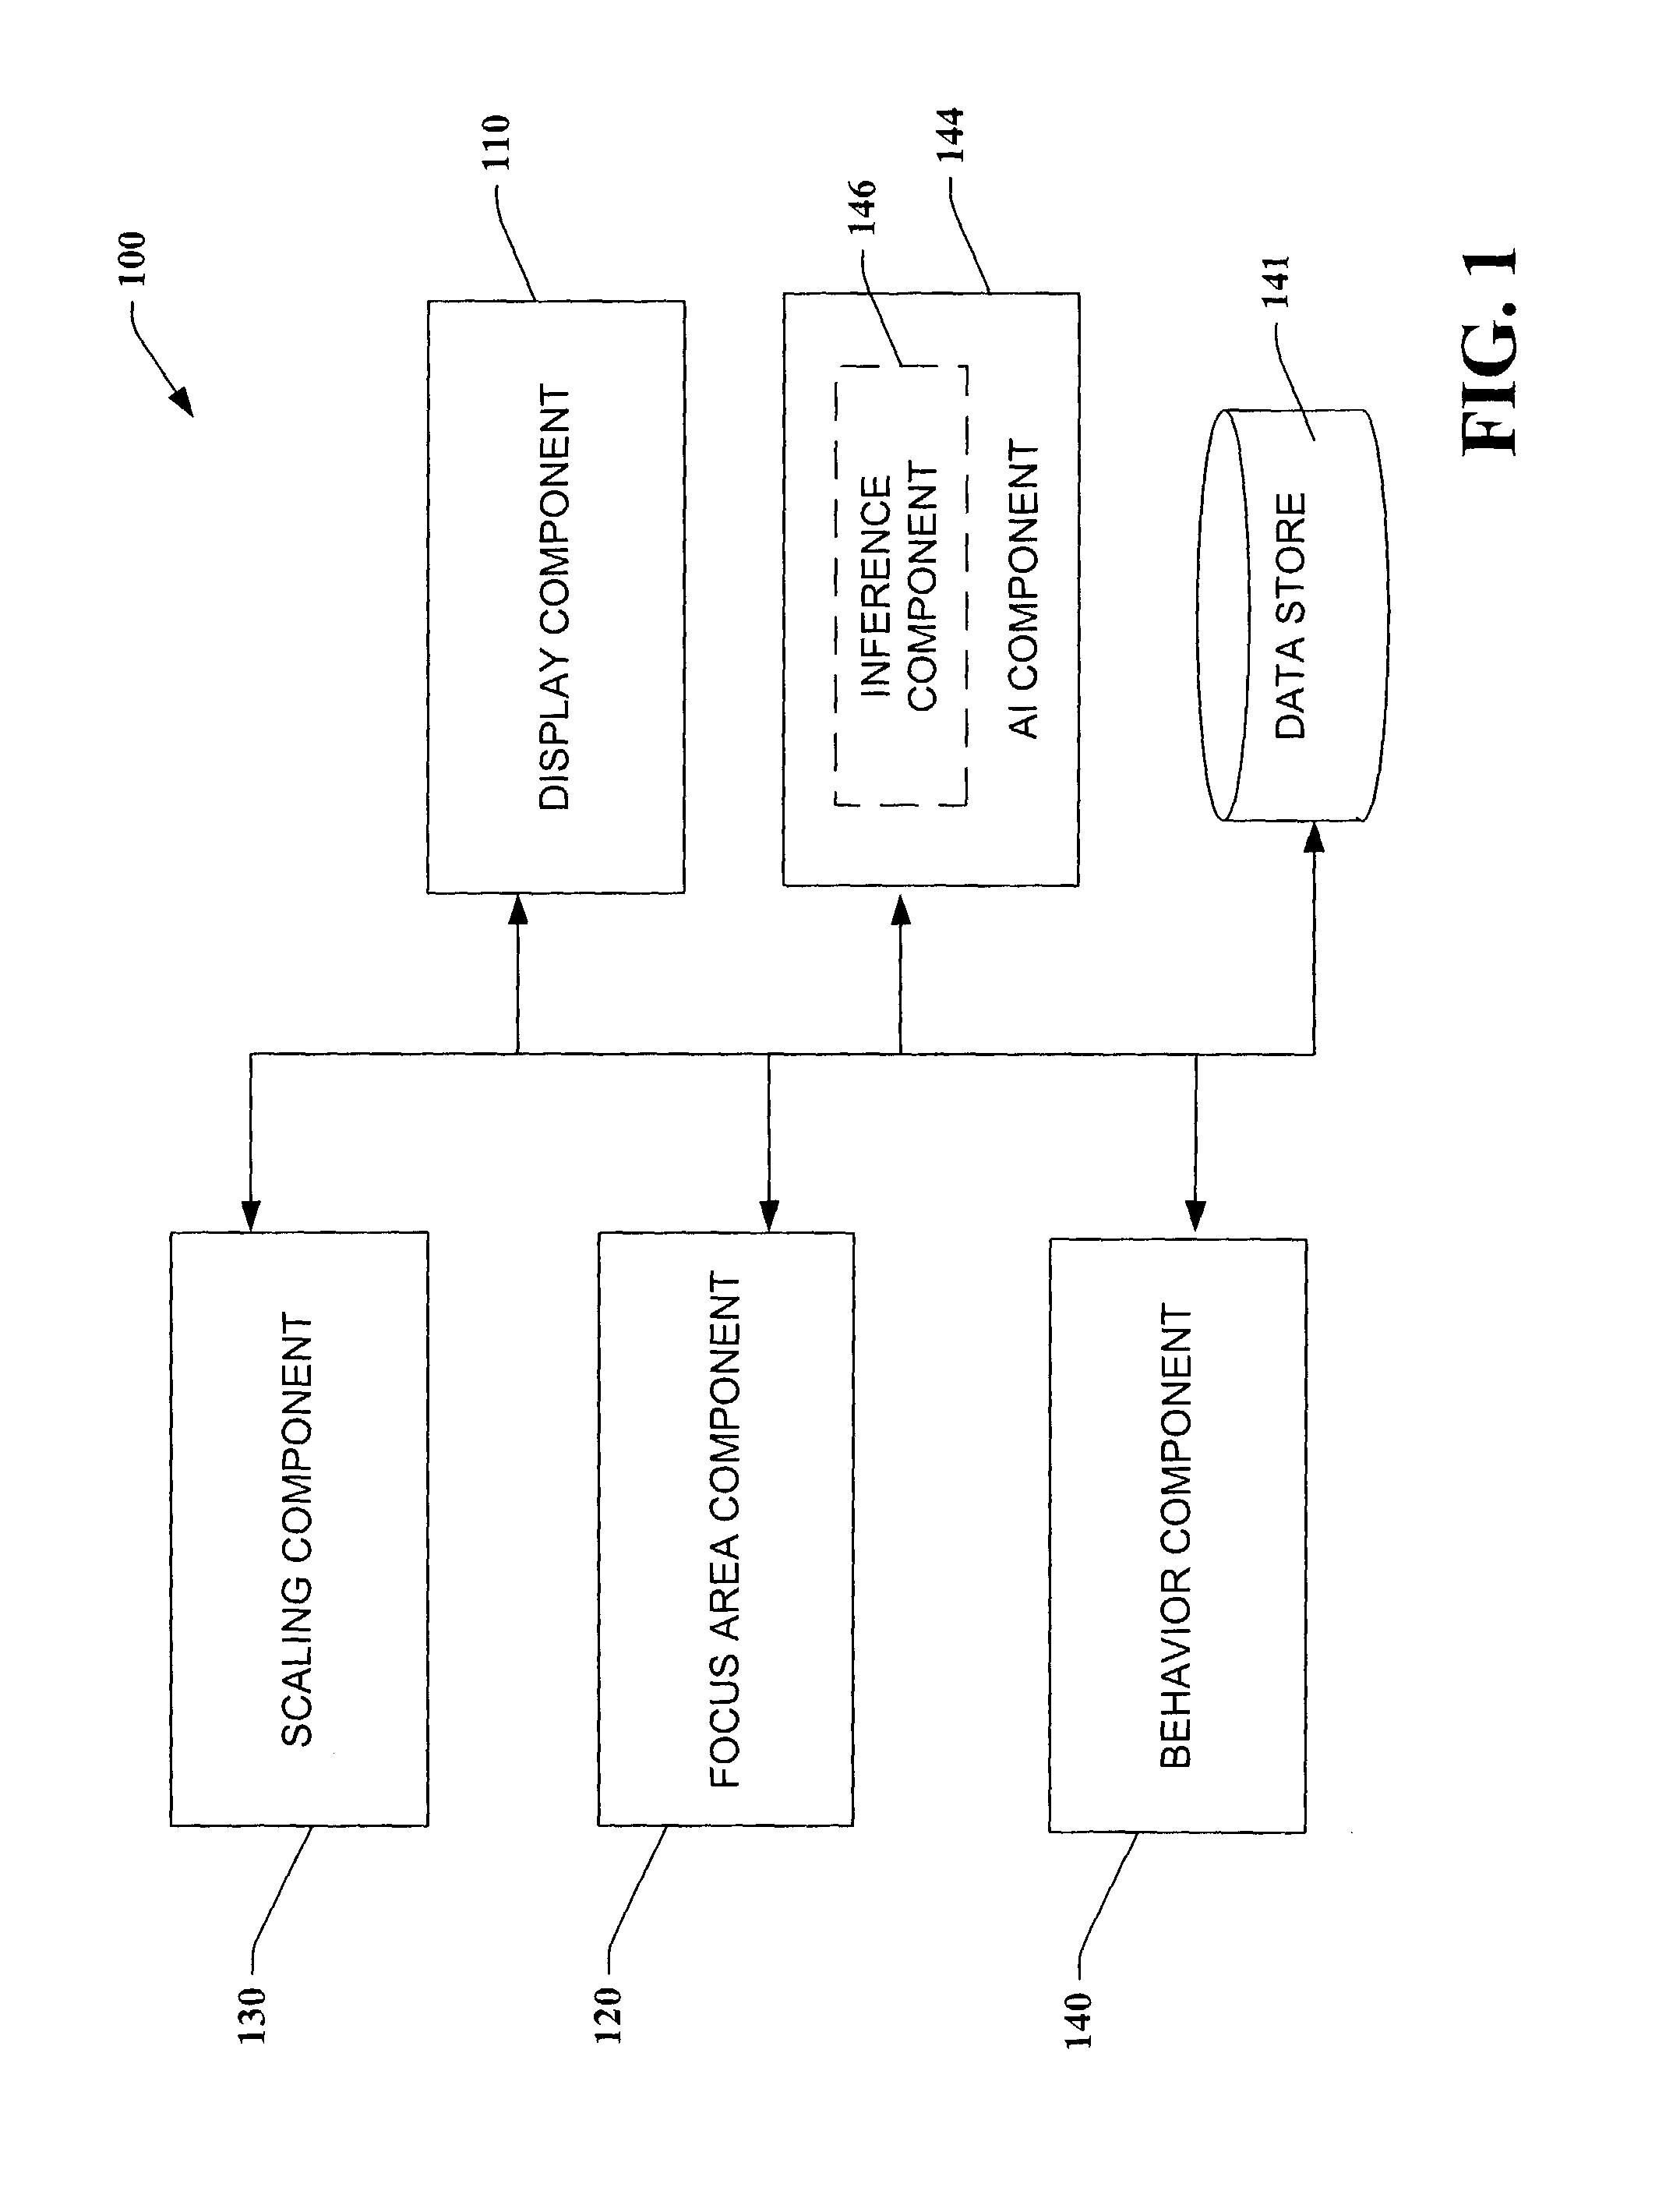 System and method that facilitates computer desktop use via scaling of displayed objects with shifts to the periphery